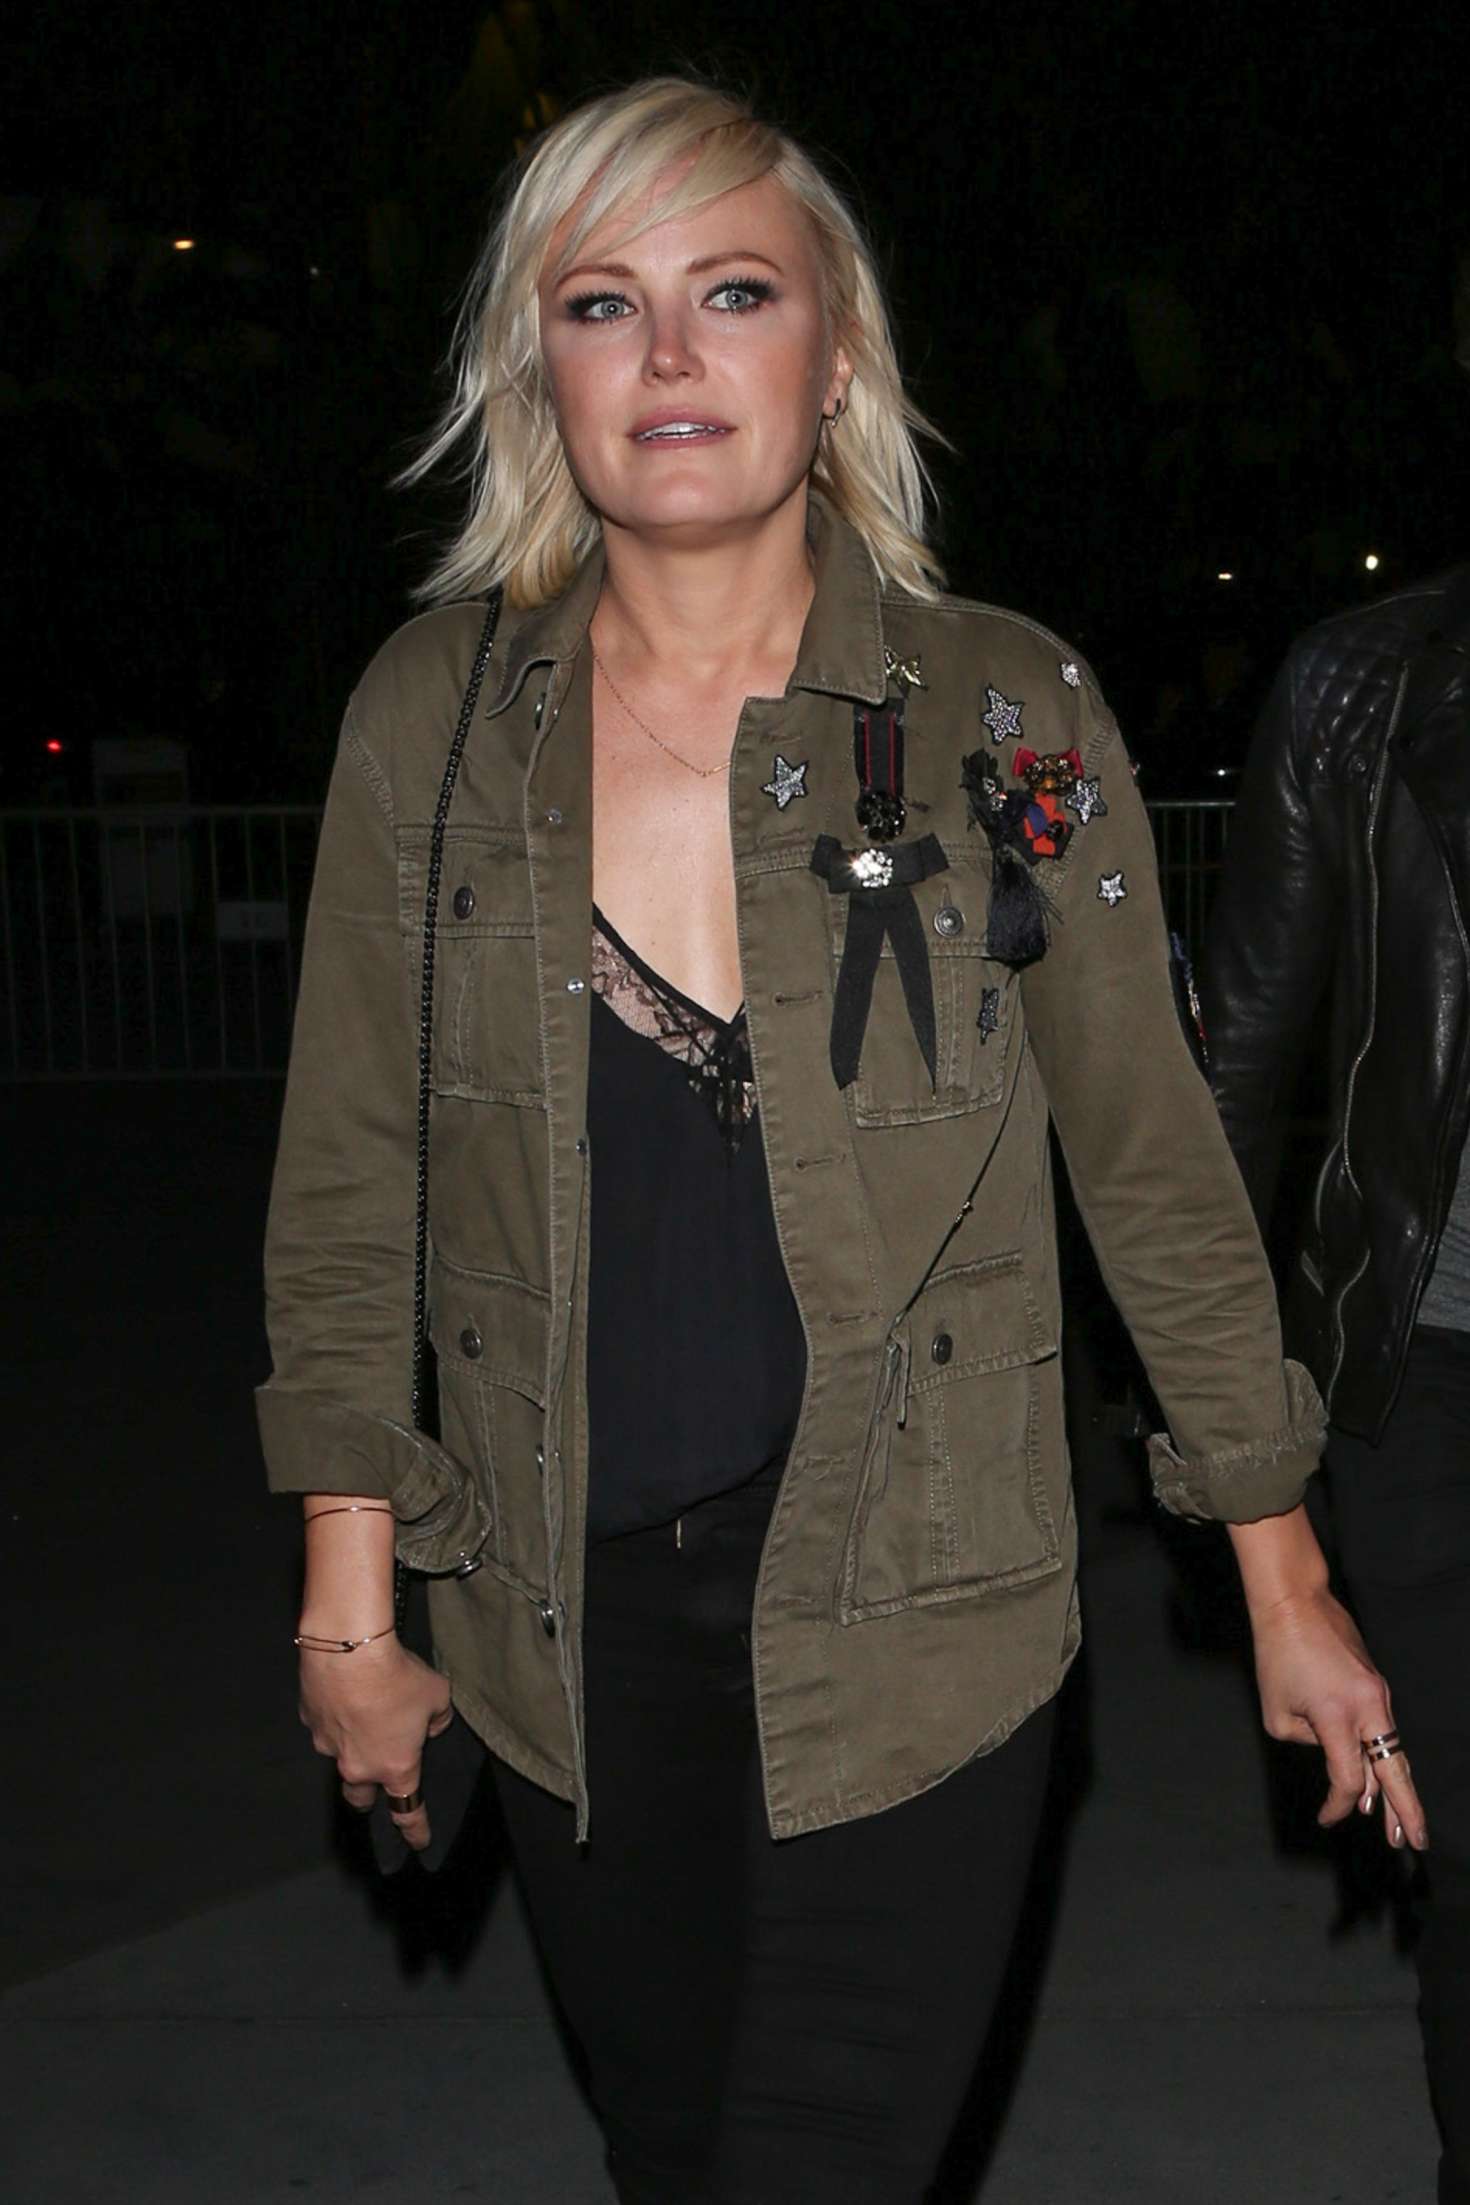 Malin Akerman at Red Hot Chili Peppers concert at the Staples Center in Los Angeles